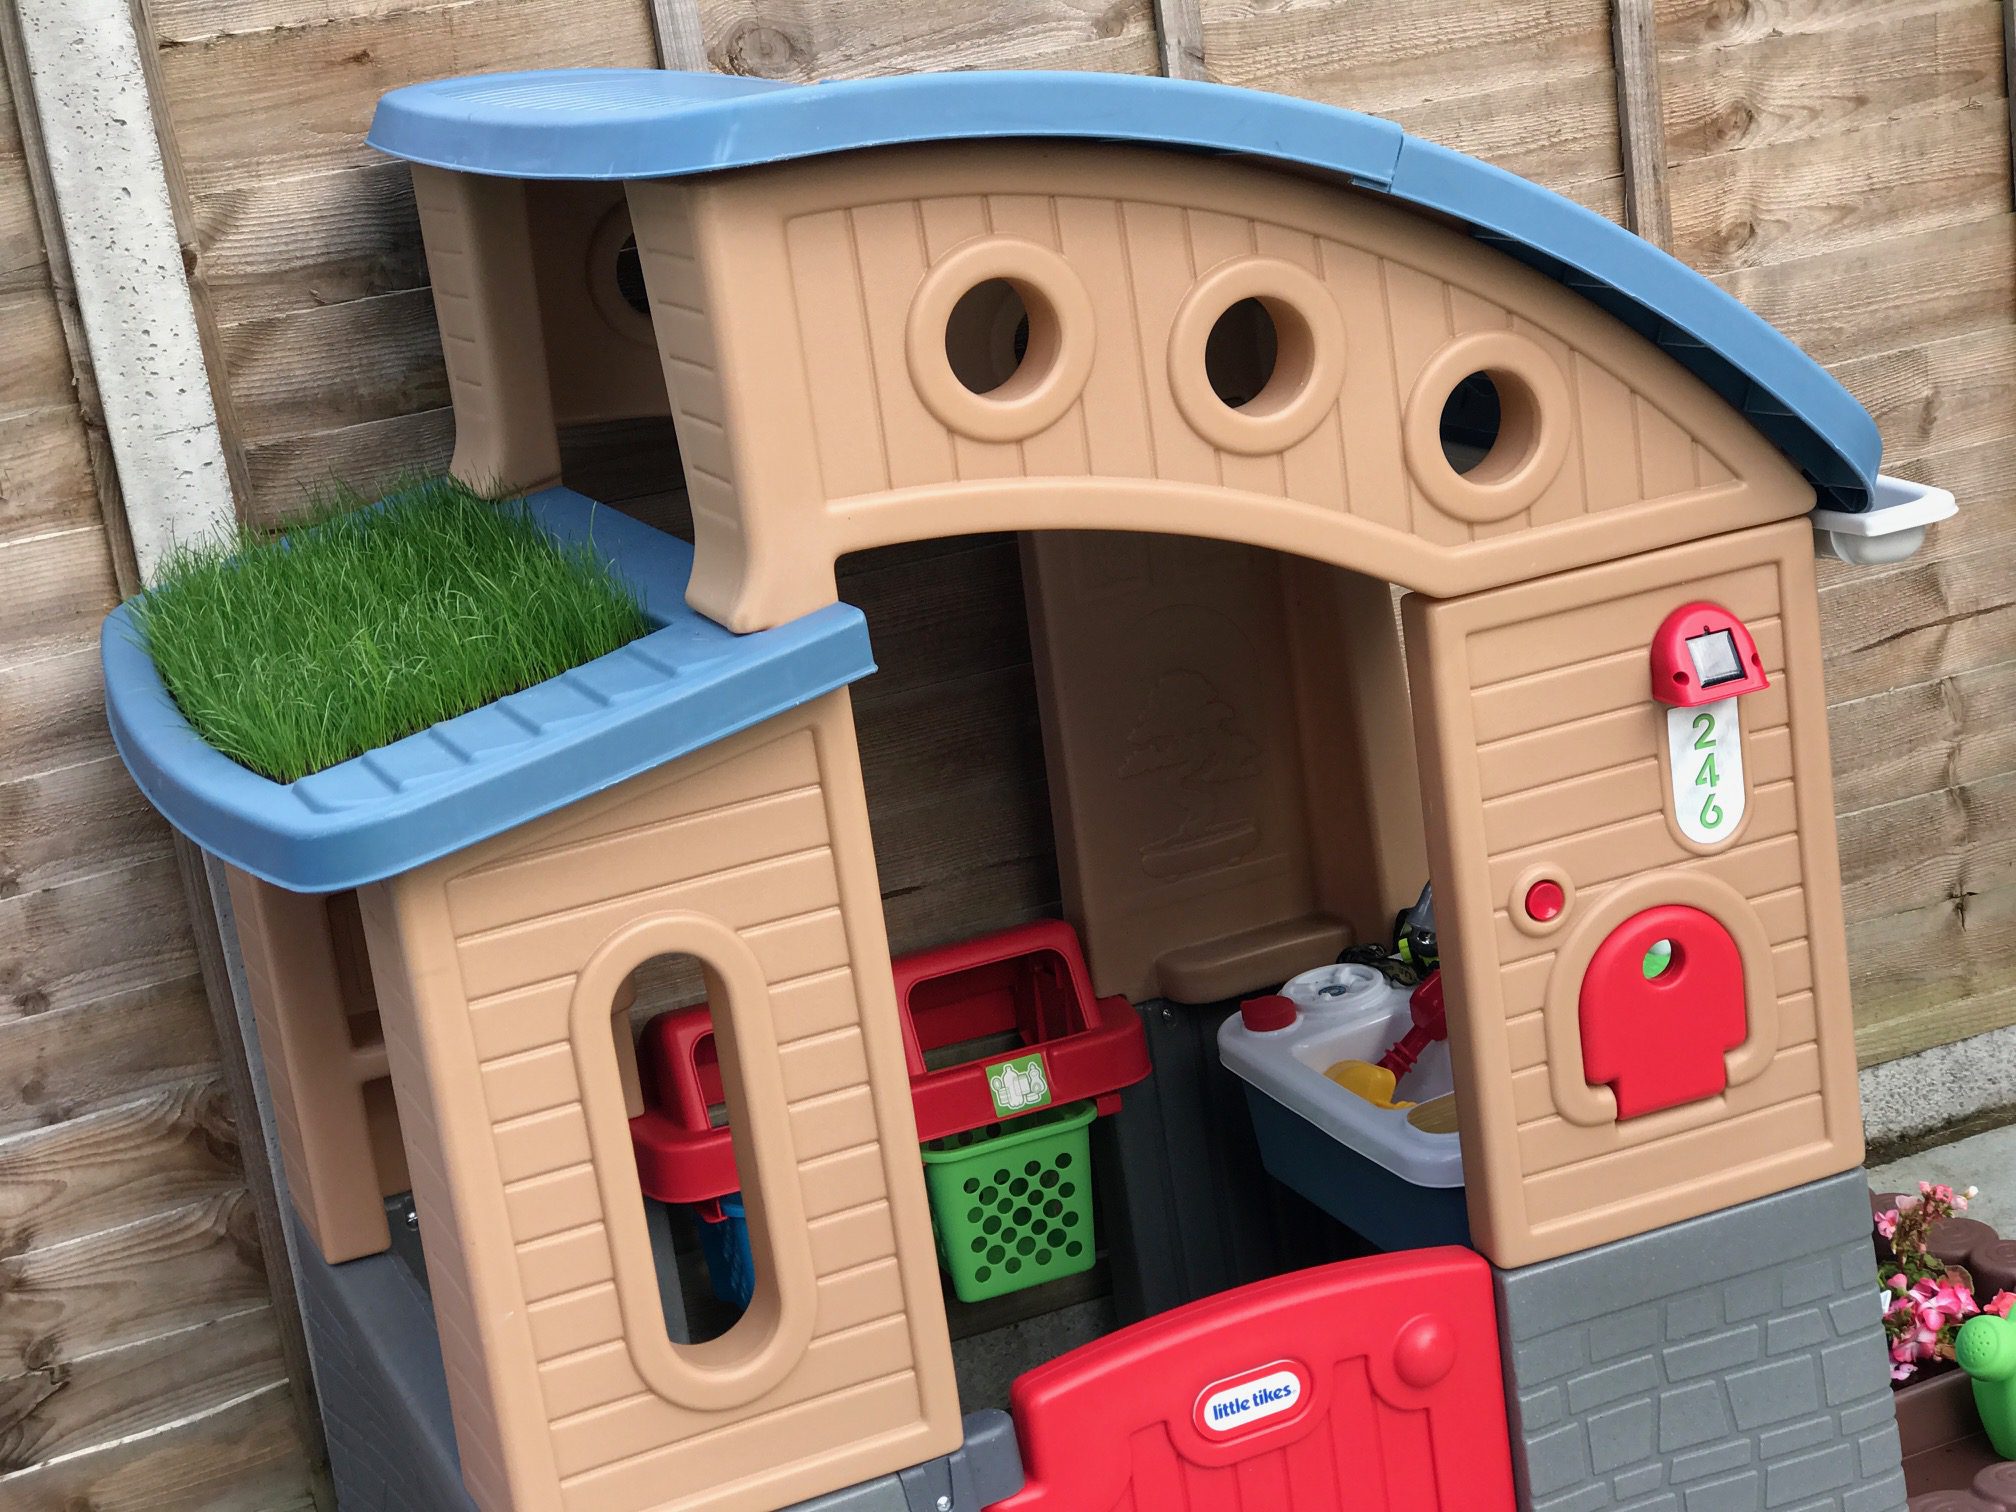 REVIEW – Little Tikes Go Green Playhouse